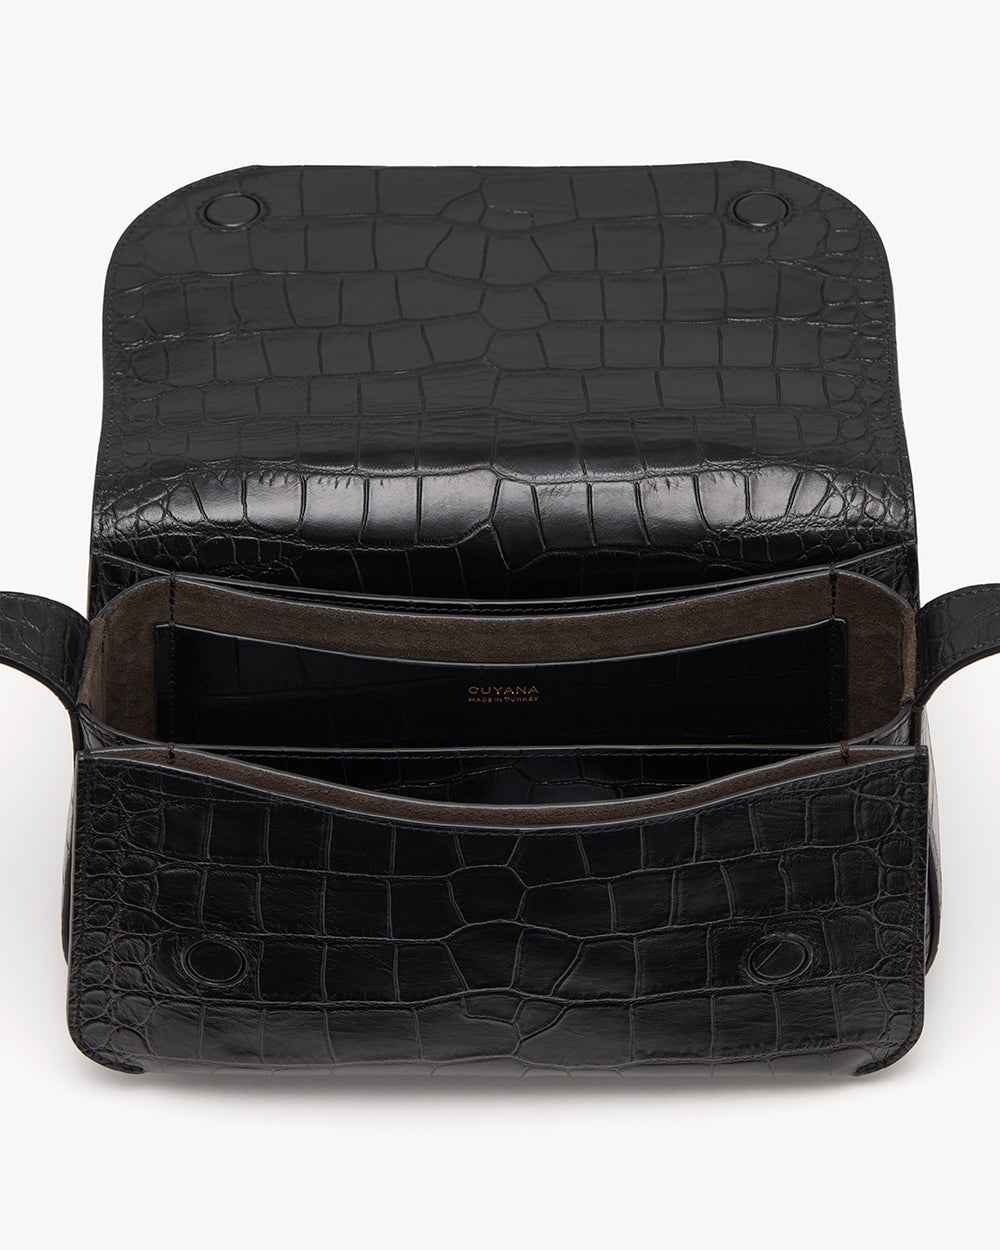 Open croc-embossed leather bag with visible inner compartments.